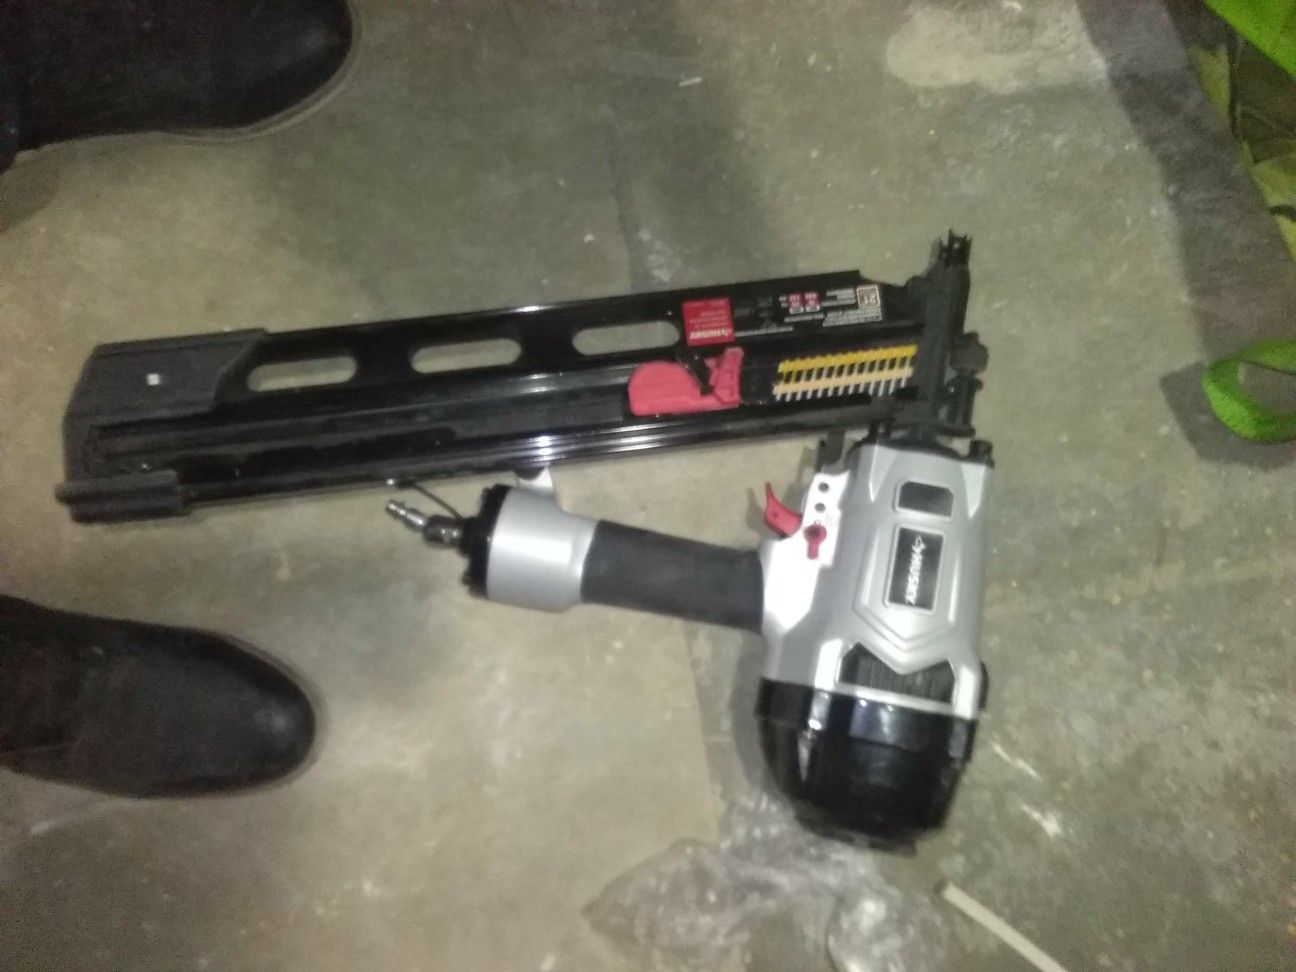 Husky nail gun litterly new used one time